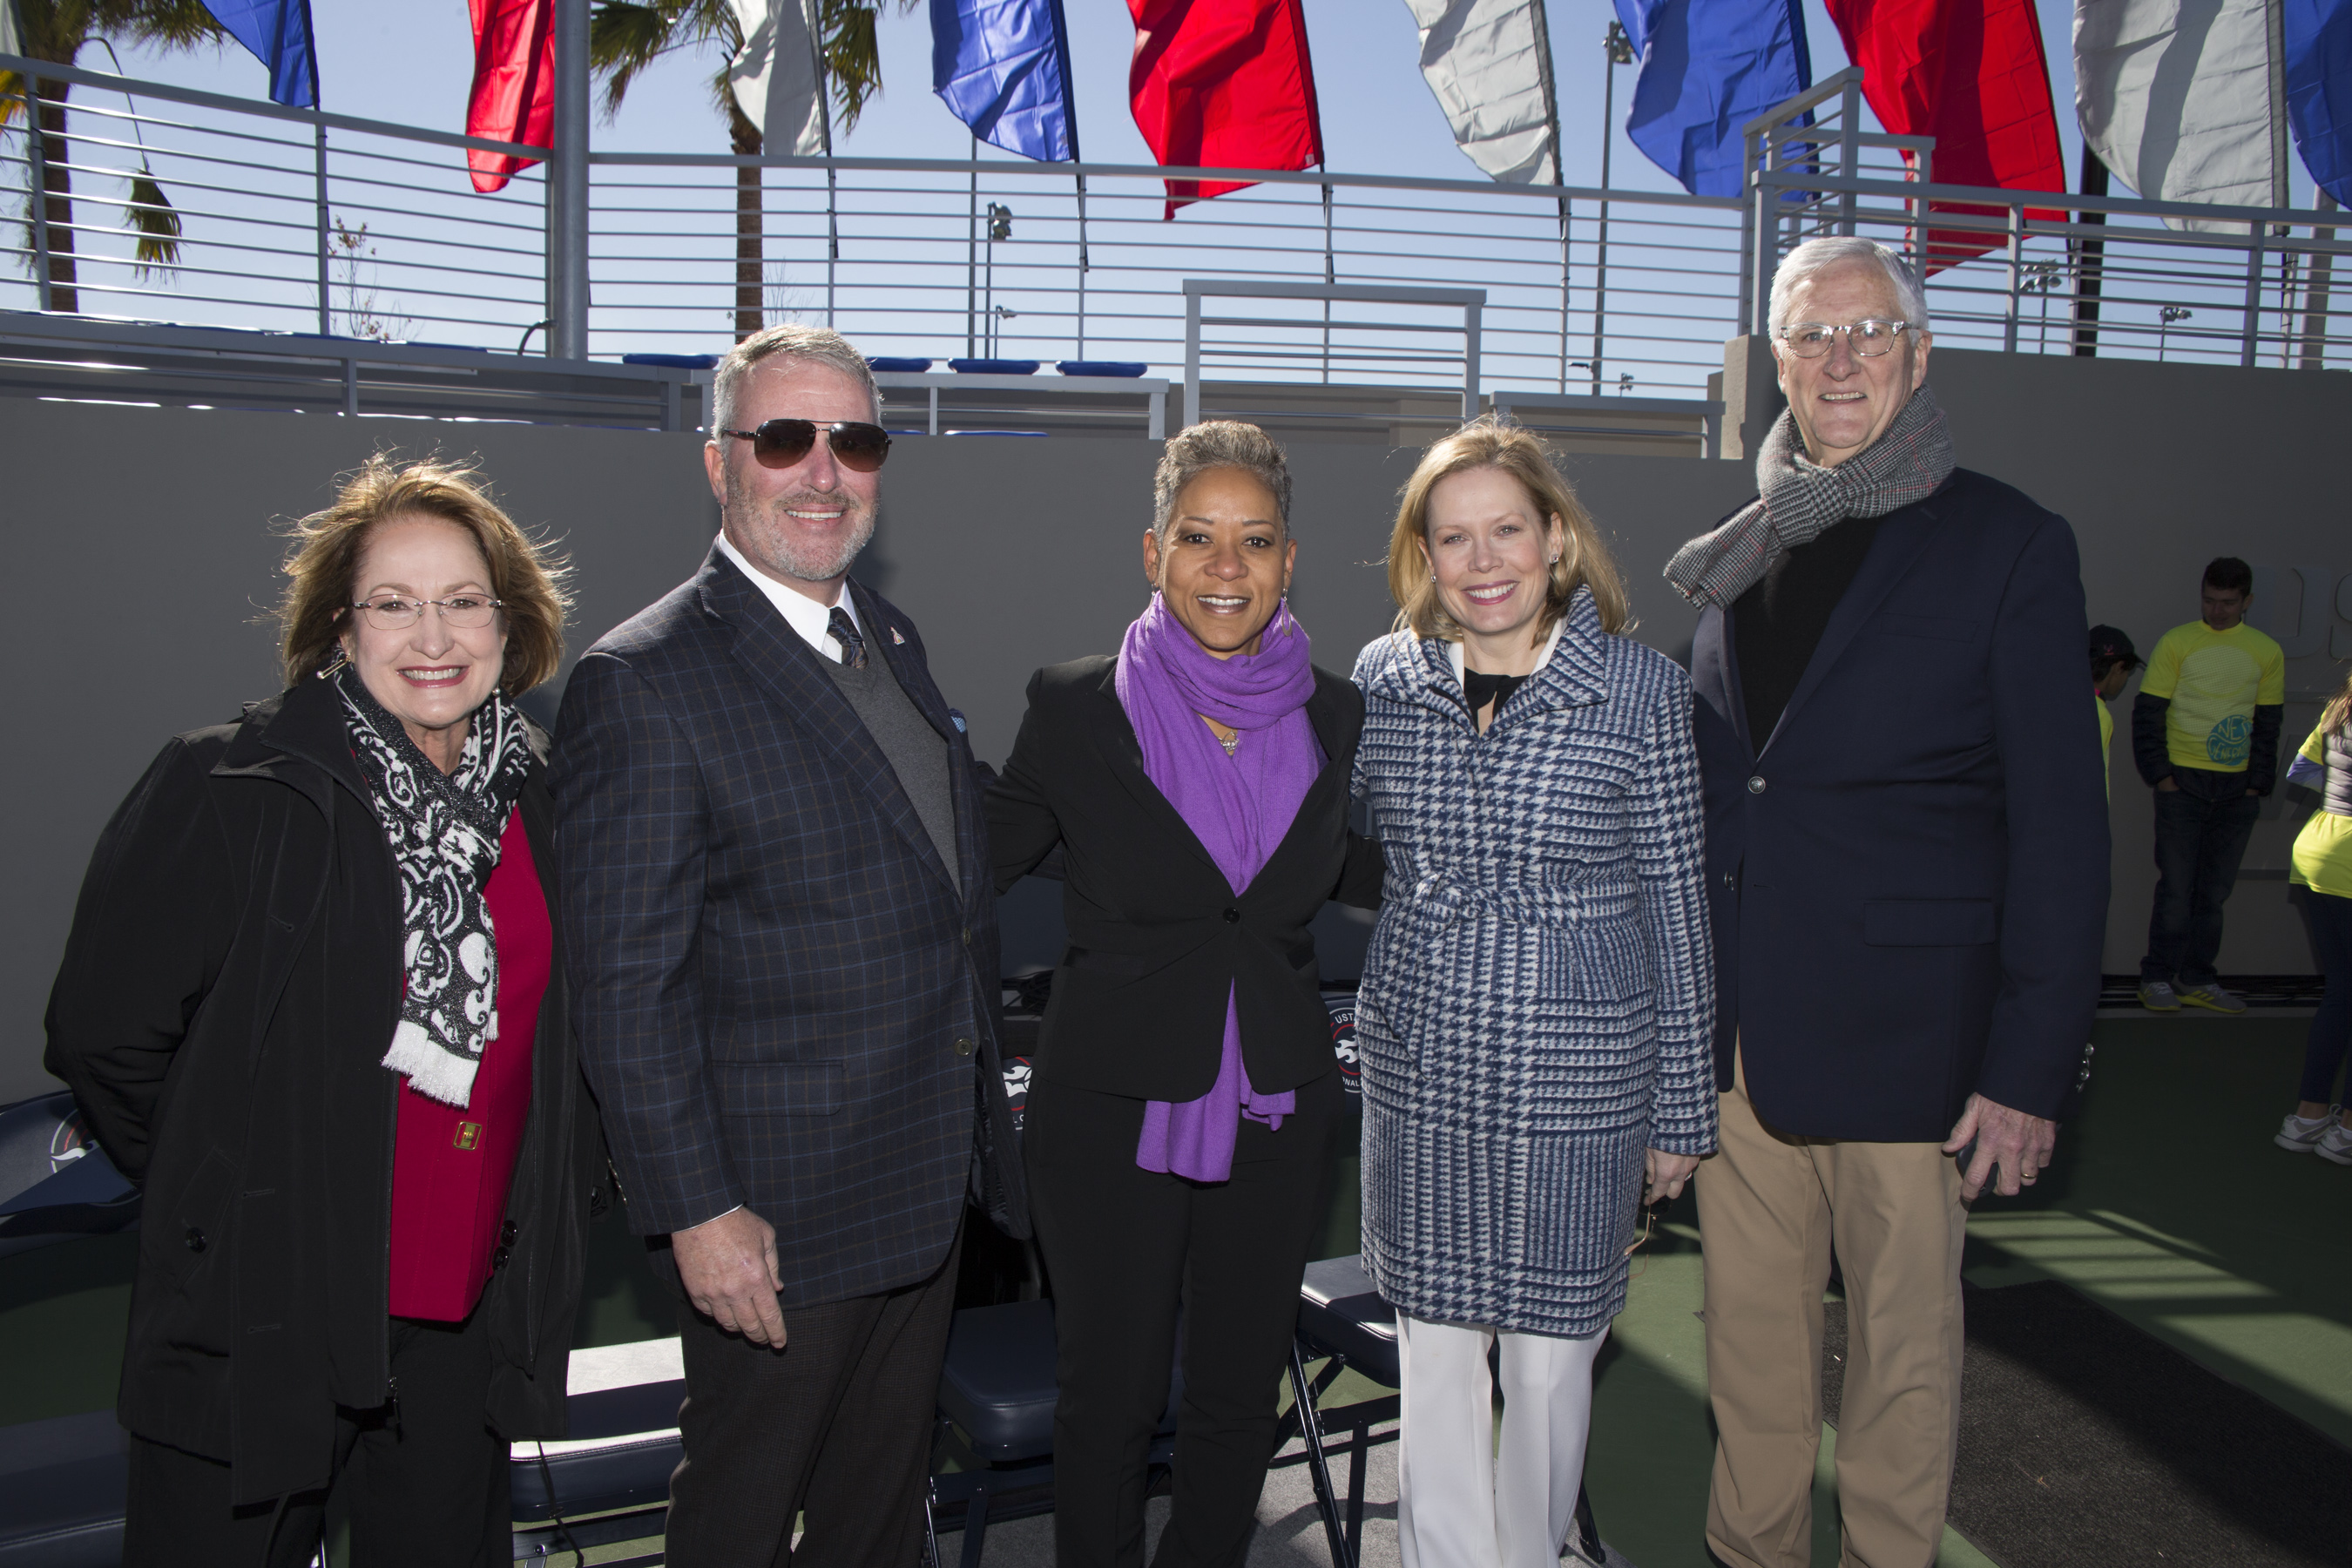 Mayor with USTA and community leaders